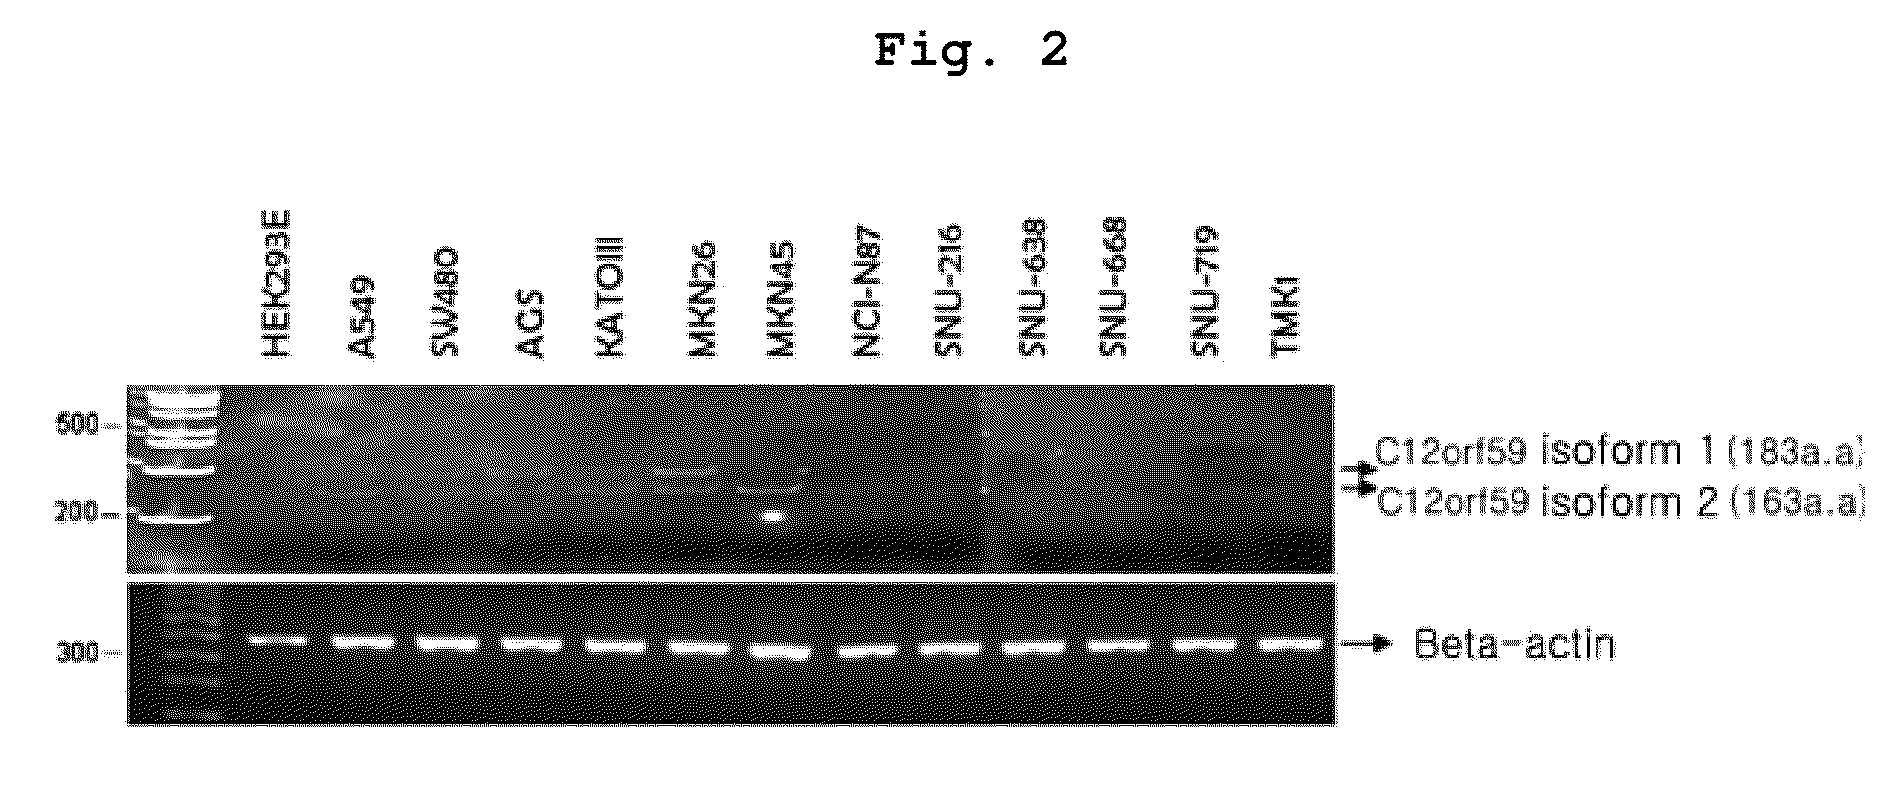 Method of treating cancer with a composition containing a C12ORF59 protein